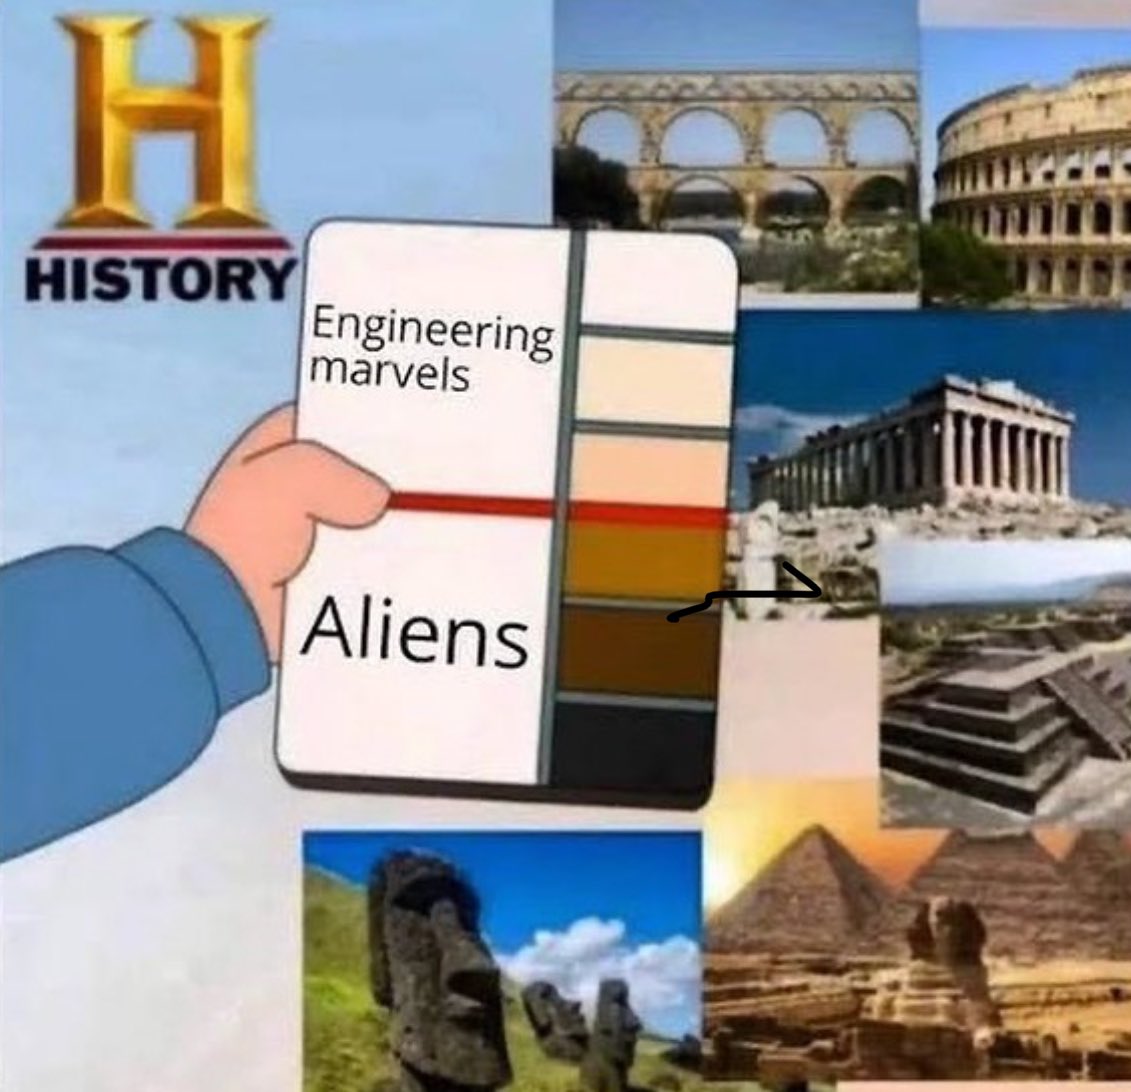 the History Channel logic: